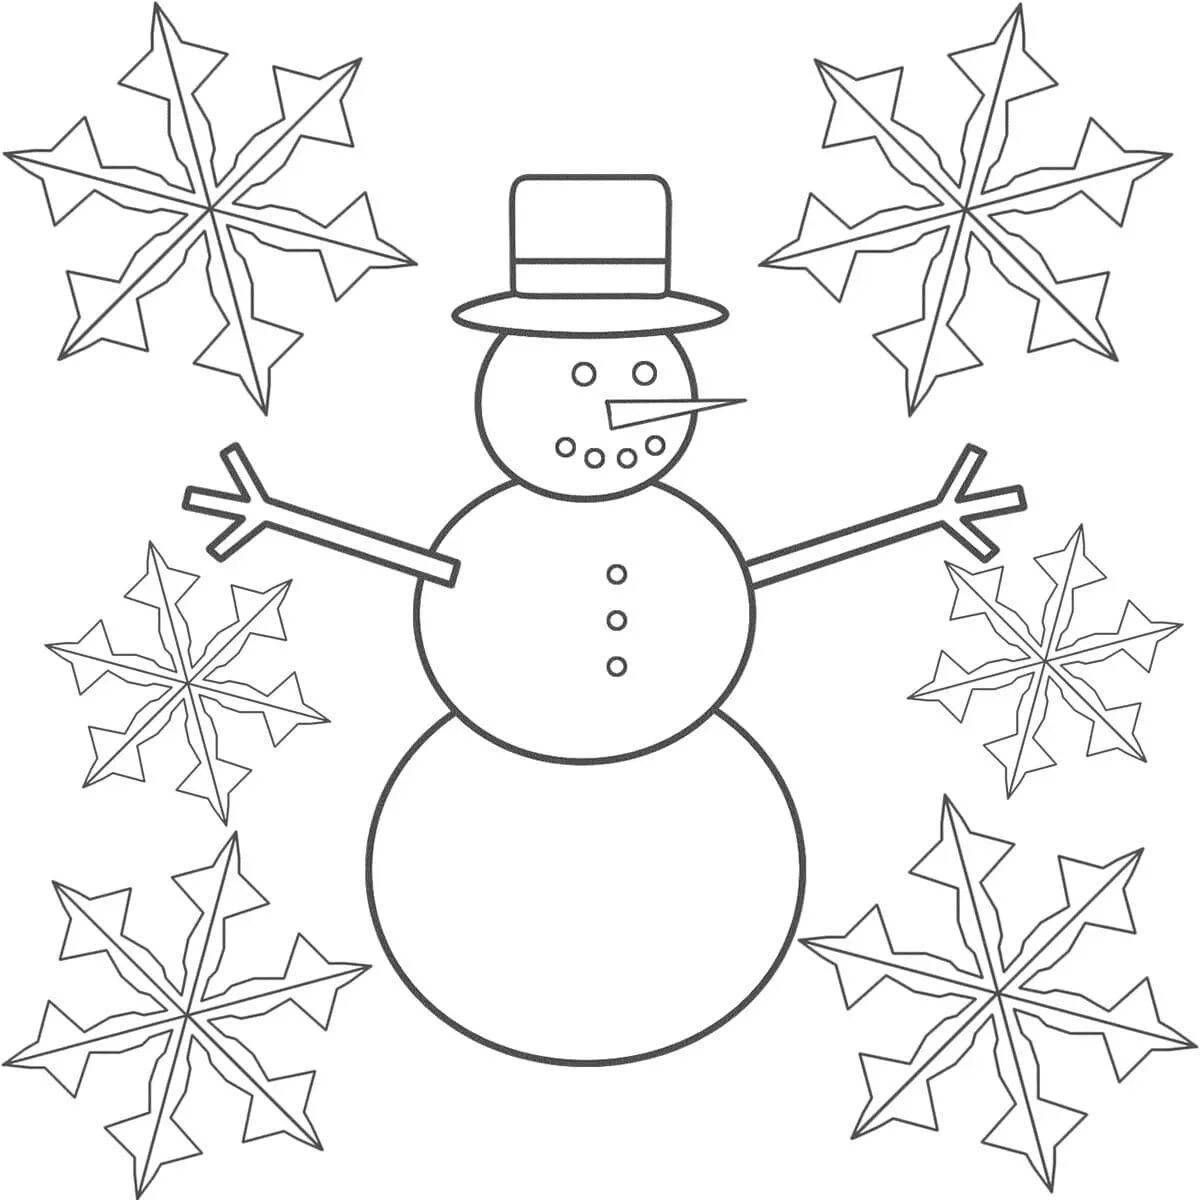 Coloring book funny snowman